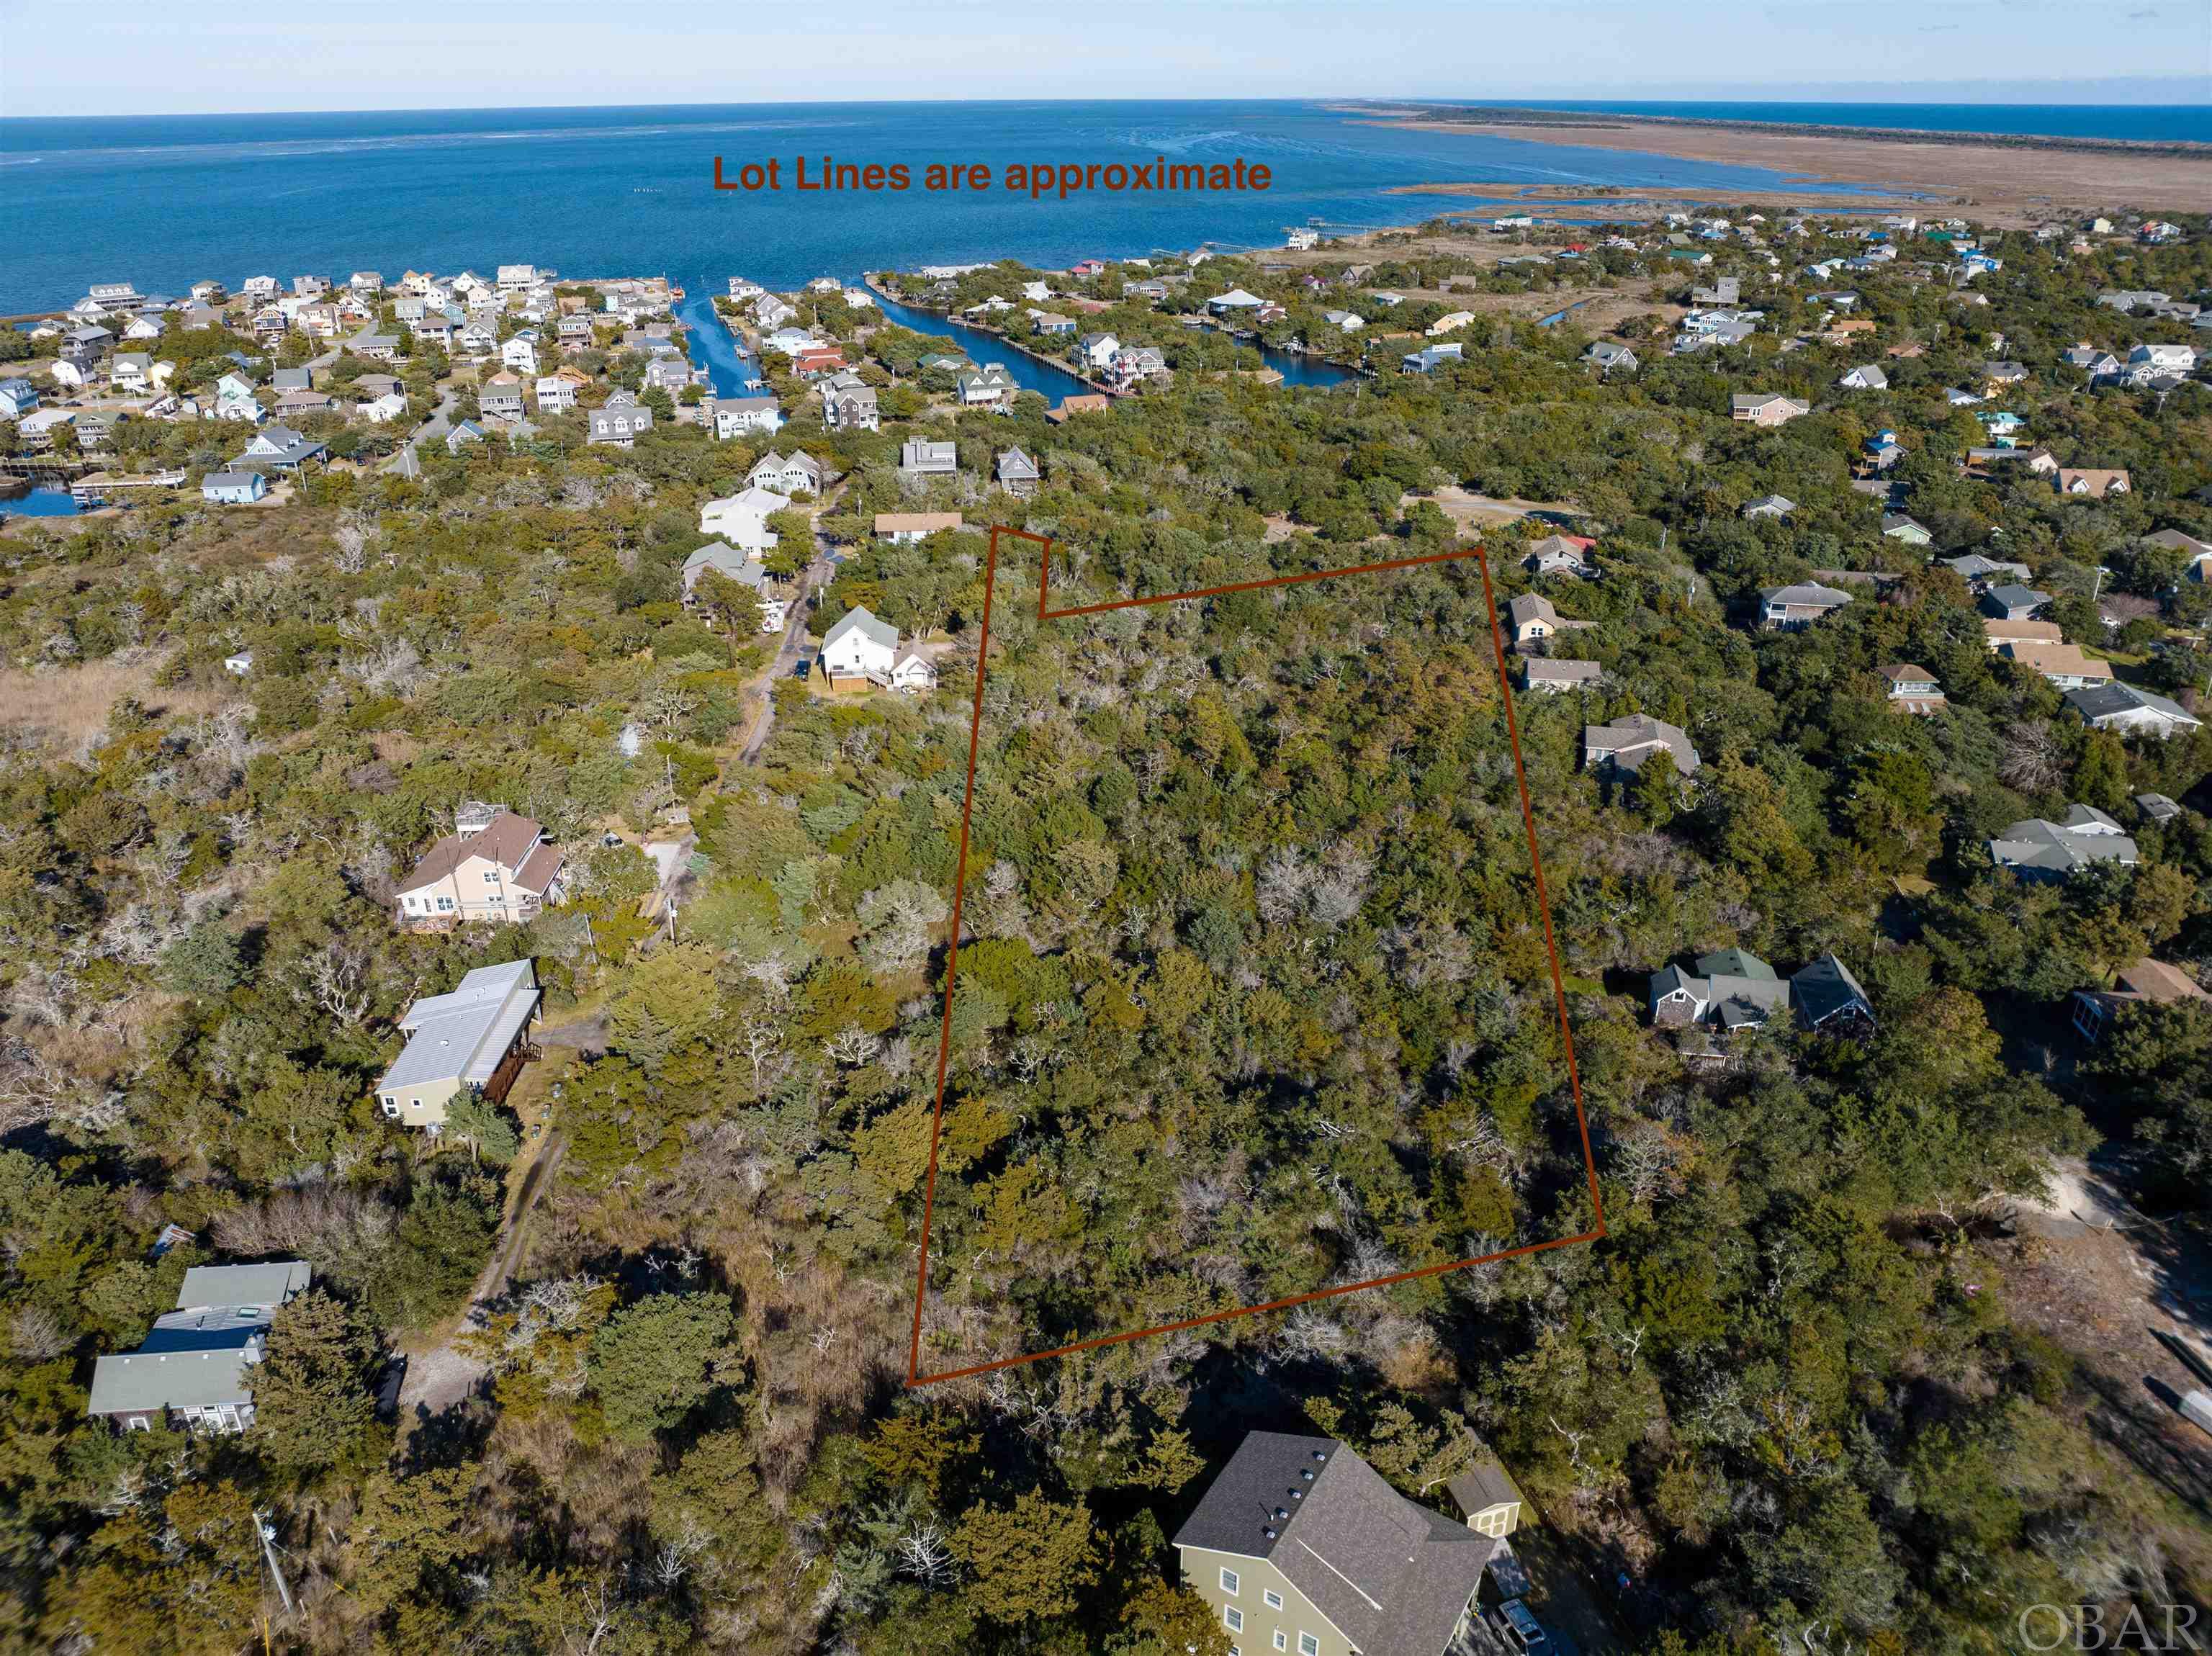 2.5 acres, 21 lots on Ocracoke! Enjoy the privacy and seclusion of this beautiful, wooded land while you build your dream home(s) in the heart of Sunset Village. Property has a mix of natural uplands and wetlands. There is approval for two 4 bedroom peat septic systems on lots 55 and 56, permits on file. Access is via a public deeded right of way, "3rd Avenue,"  which is currently unbuilt. Elevation maps in supporting documents.